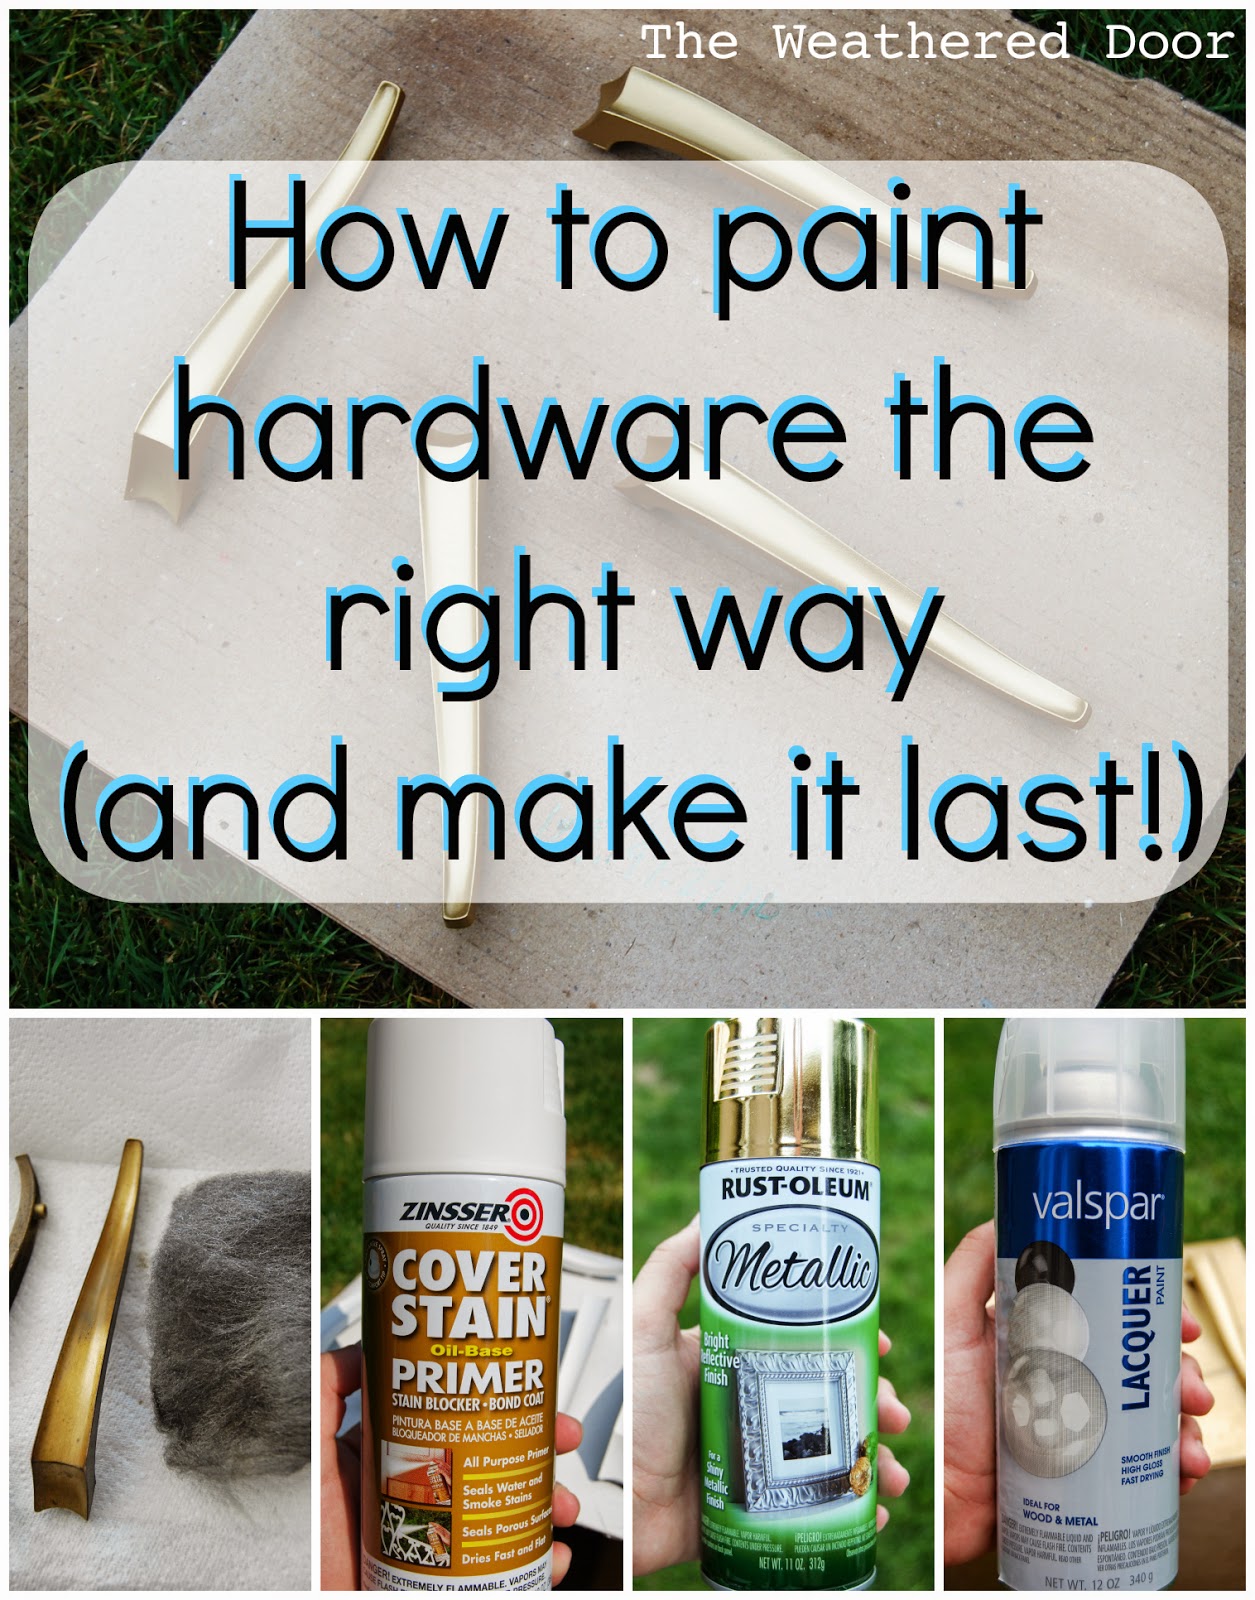 How To Paint Hardware And Make It Last, Best Gold Spray Paint For Cabinet Hardware